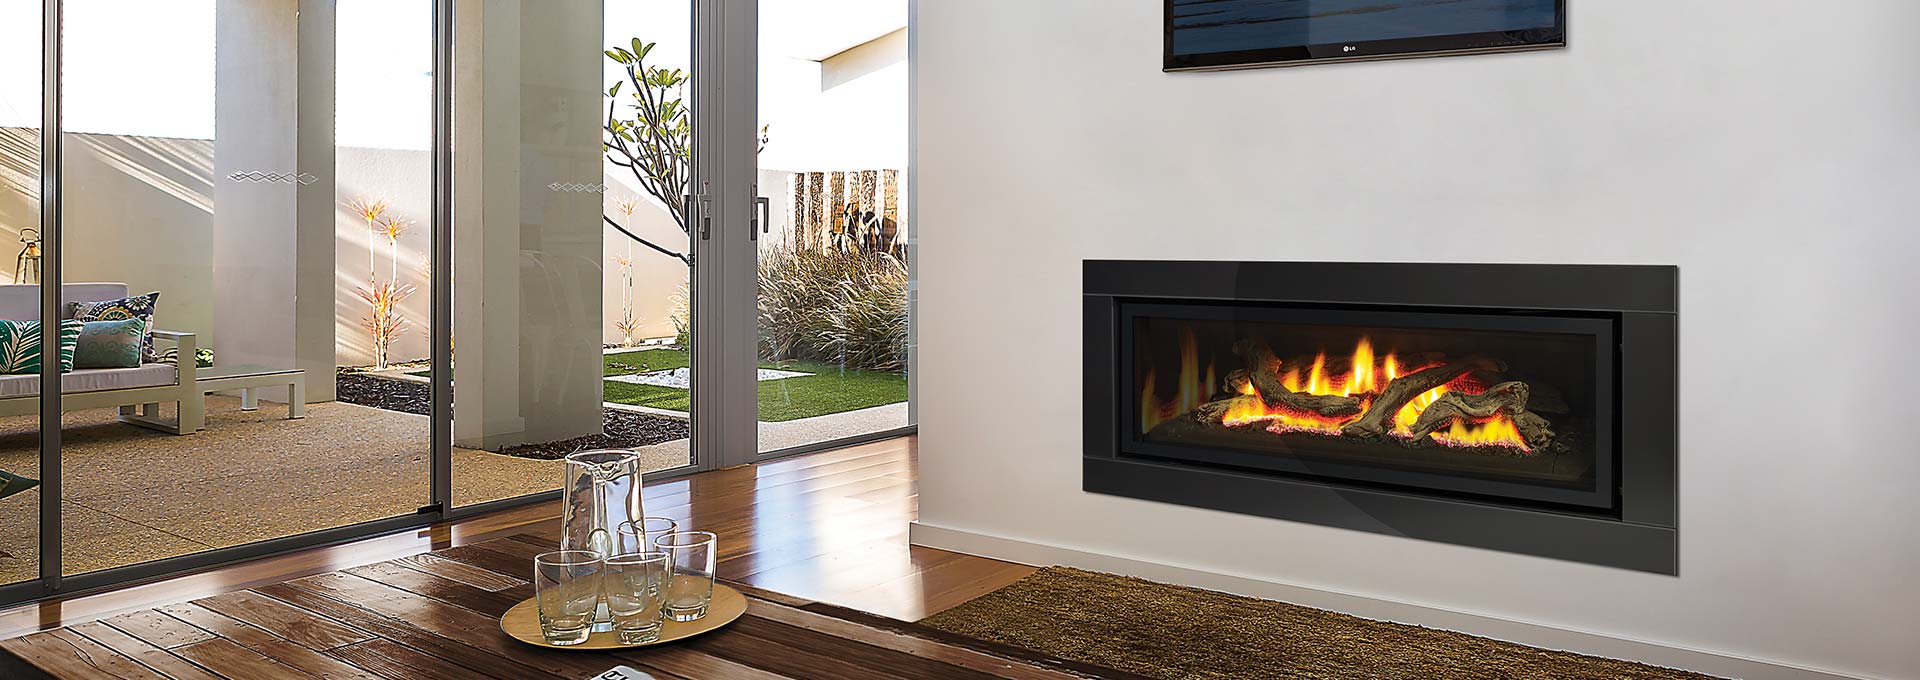 Trendiest Fireplaces Of 2018 2019, Top Rated Gas Fireplace Inserts 2018